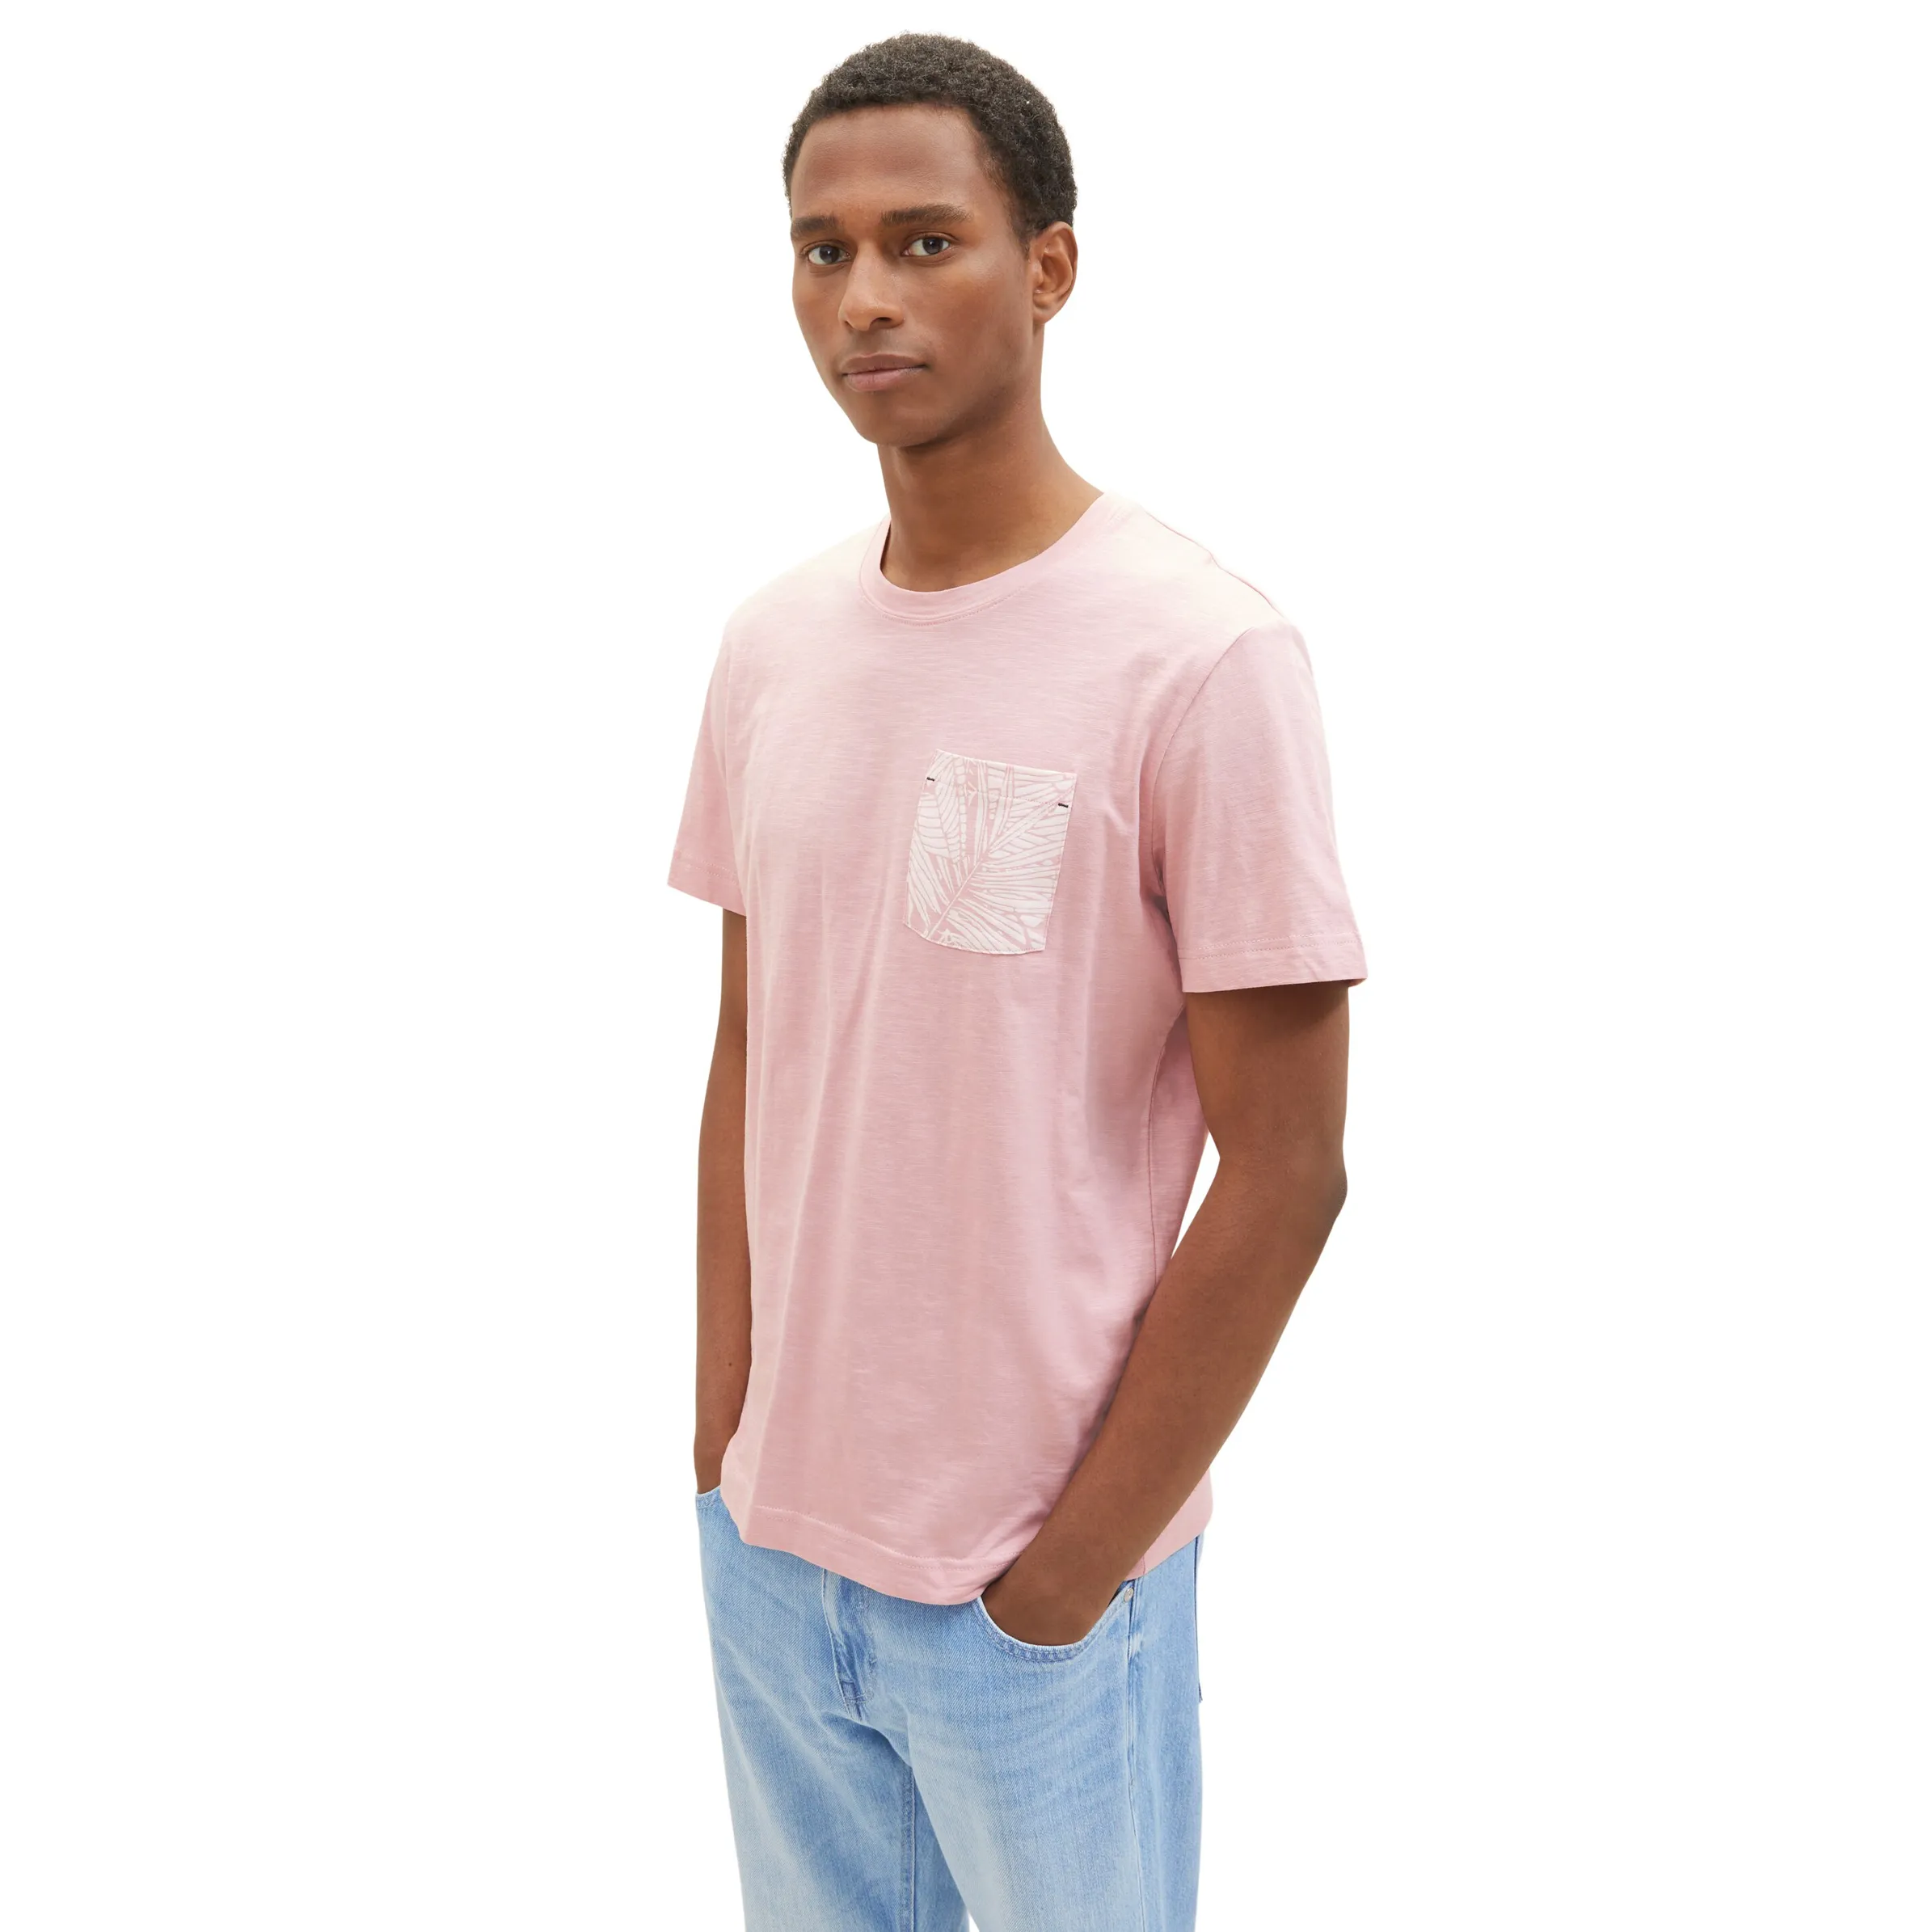 Tom Tailor 1036371 structured t-shirt with pocket Pink 880571 11055 3